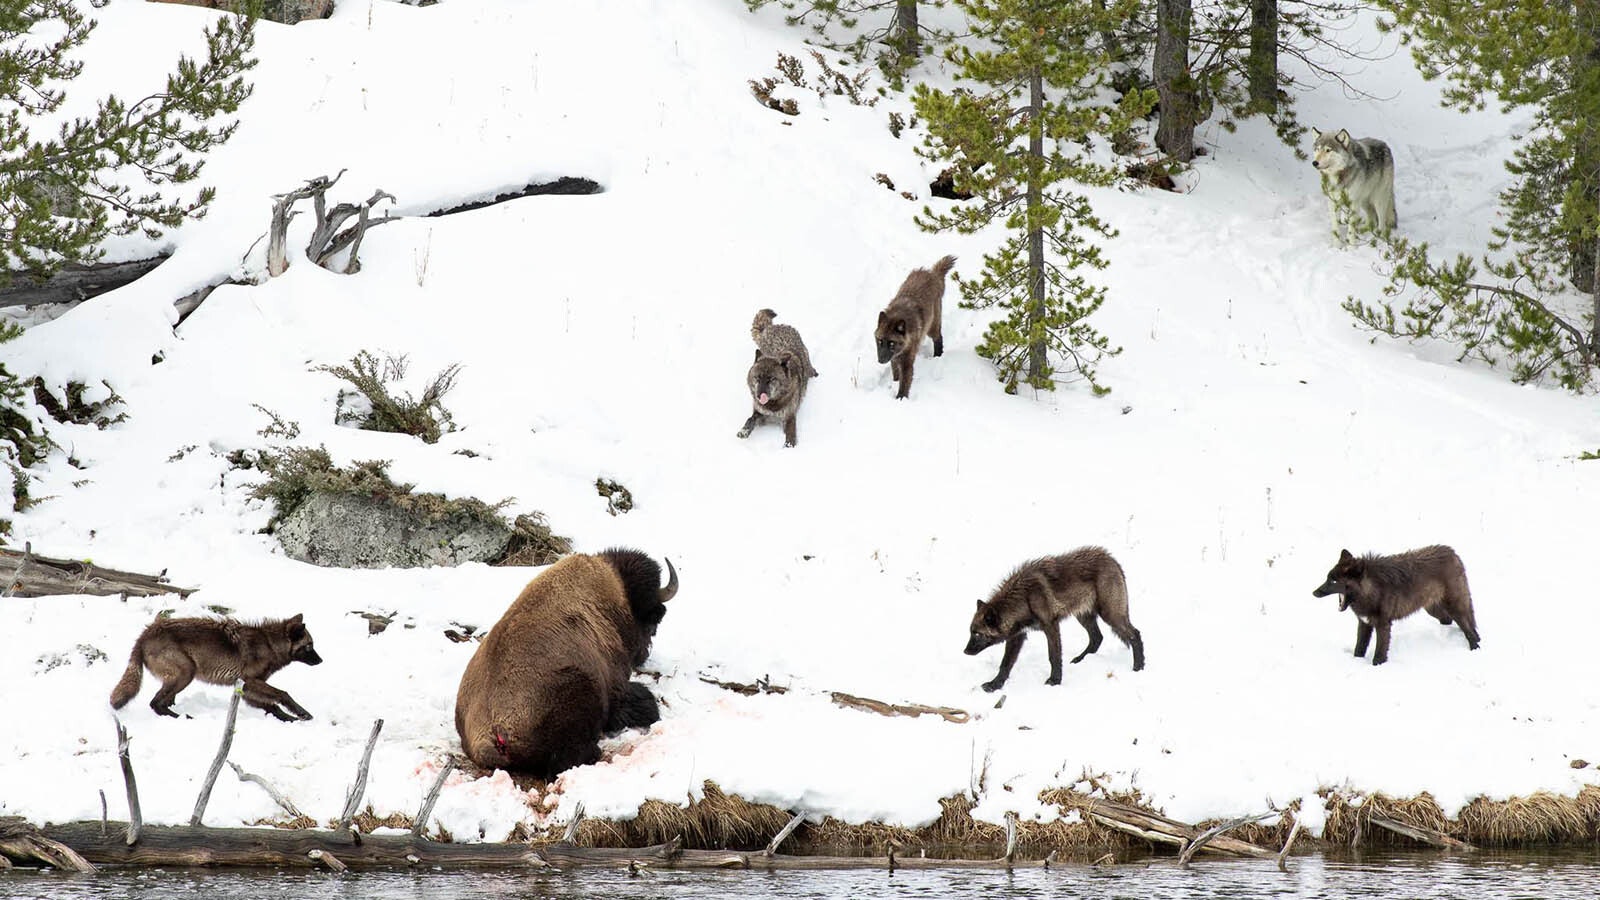 A pack of wolves engaged in a deadly standoff with a lone bison along the Firehole River in Yellowstone National Park on Saturday. Reports are that the wolves eventually prevailed.